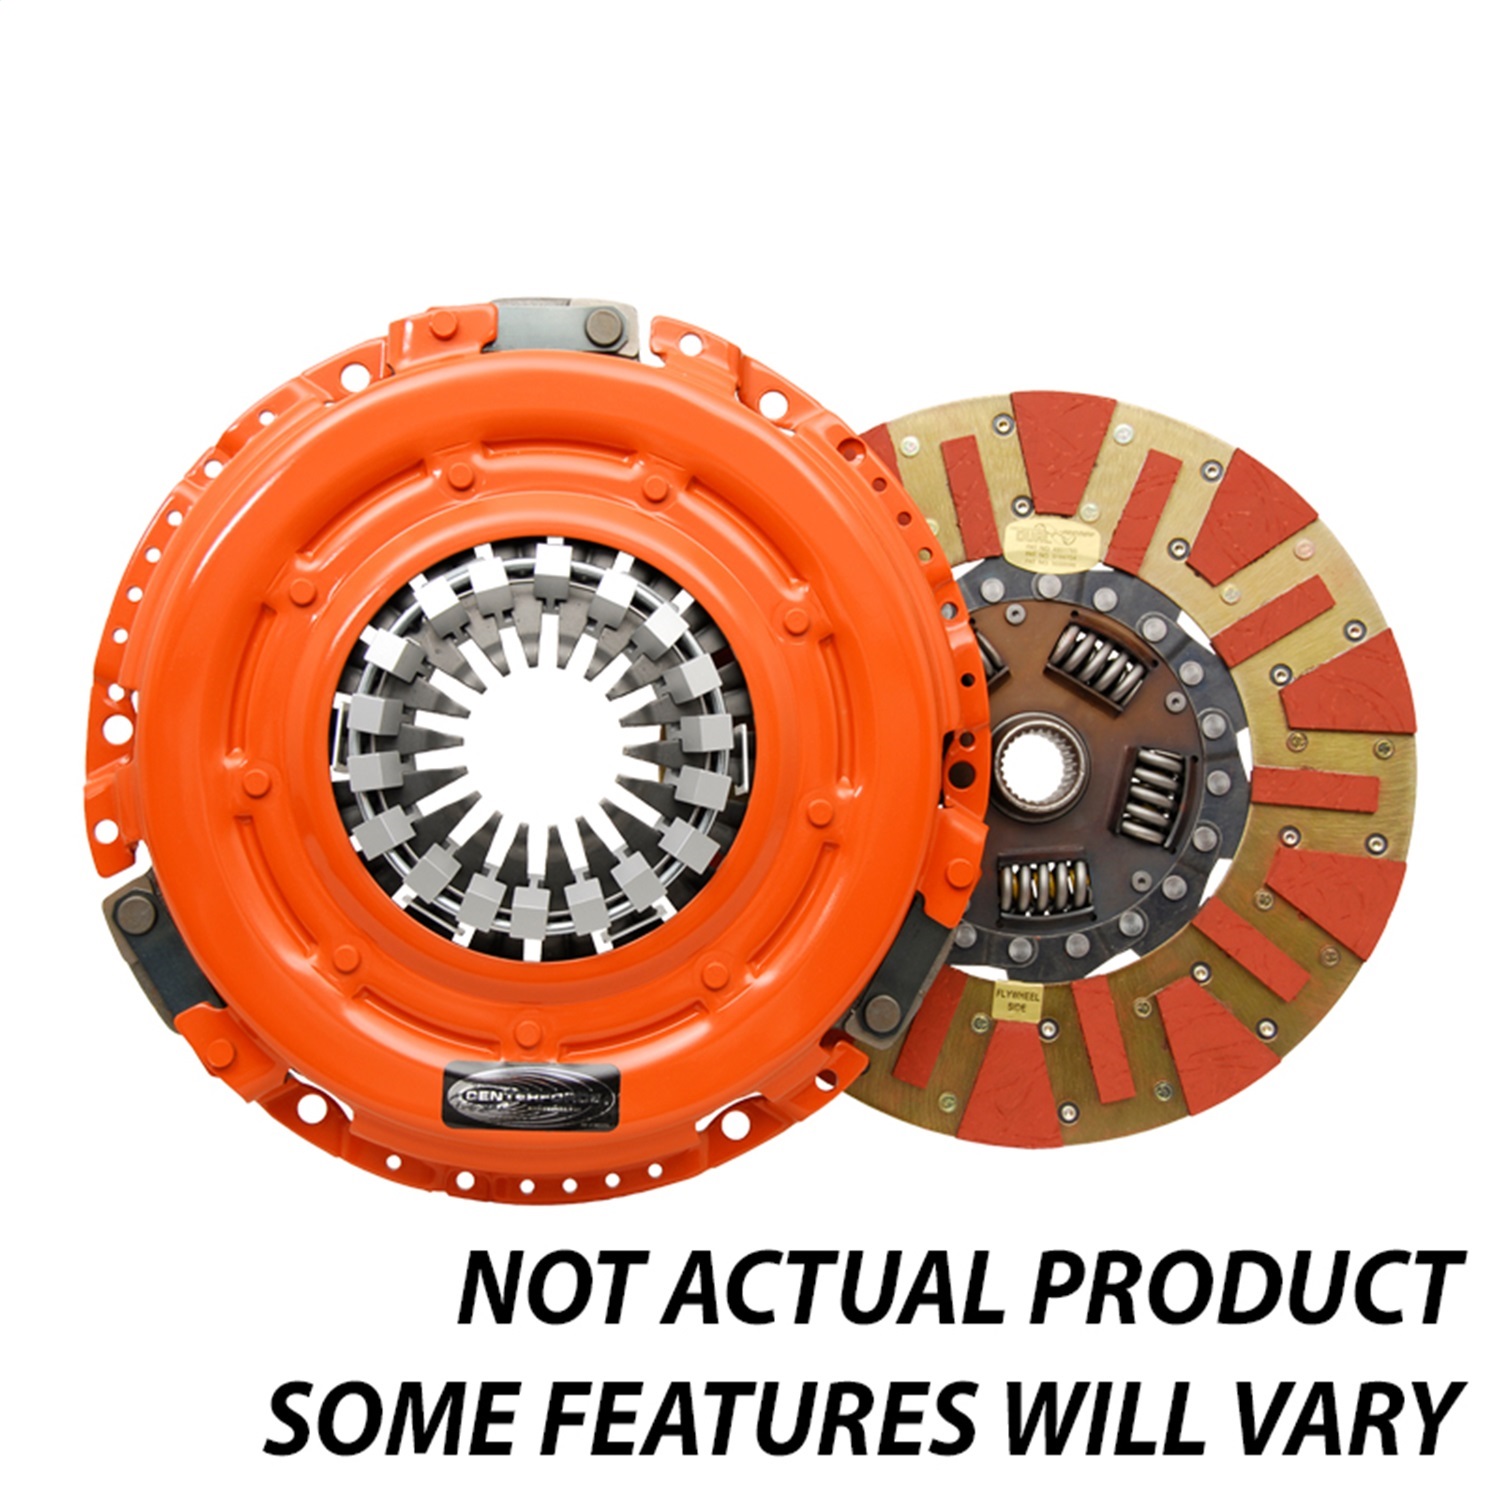 Centerforce Centerforce DF226552 Dual Friction Clutch Pressure Plate And Disc Set